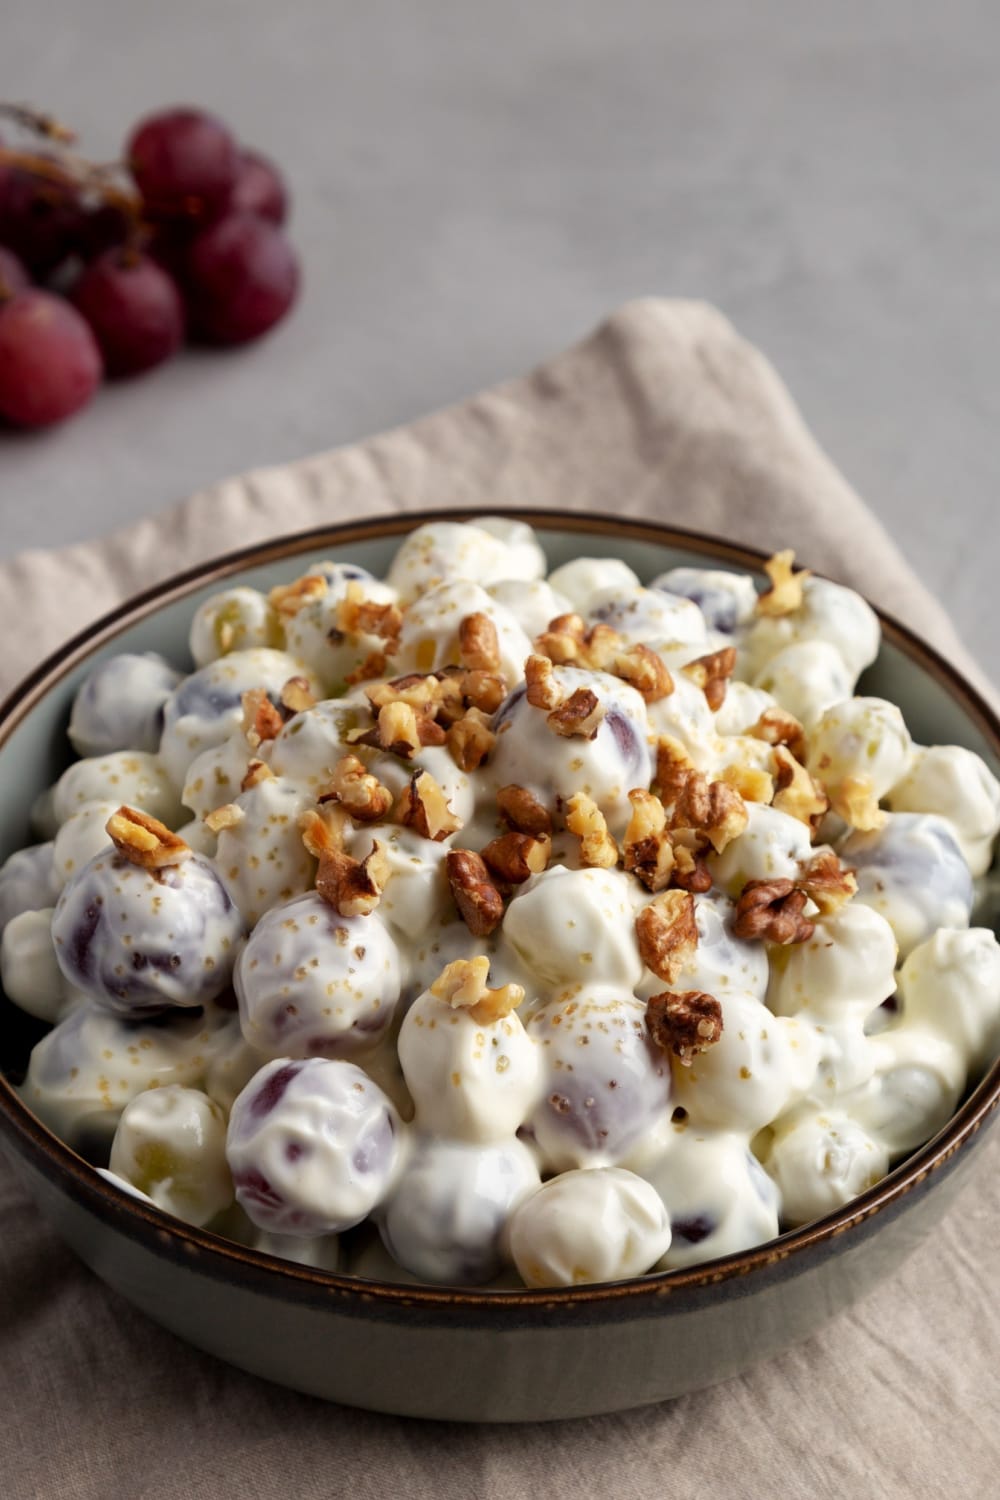 Bowl of Creamy Grapes Salad with crushed walnuts on top